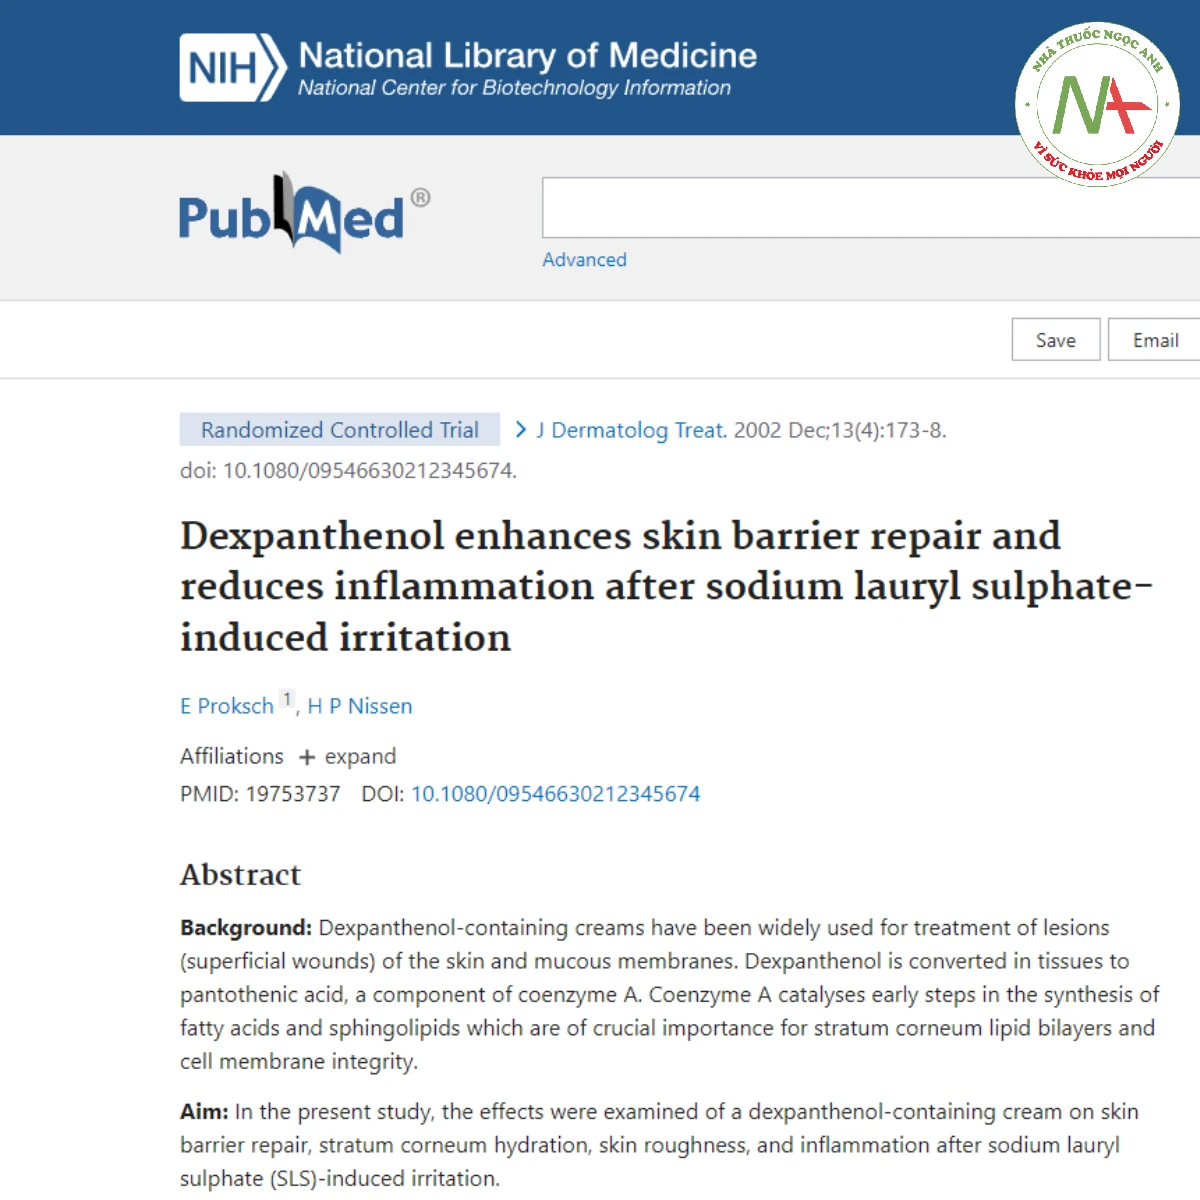 Dexpanthenol enhances skin barrier repair and reduces inflammation after sodium lauryl sulphate-induced irritation